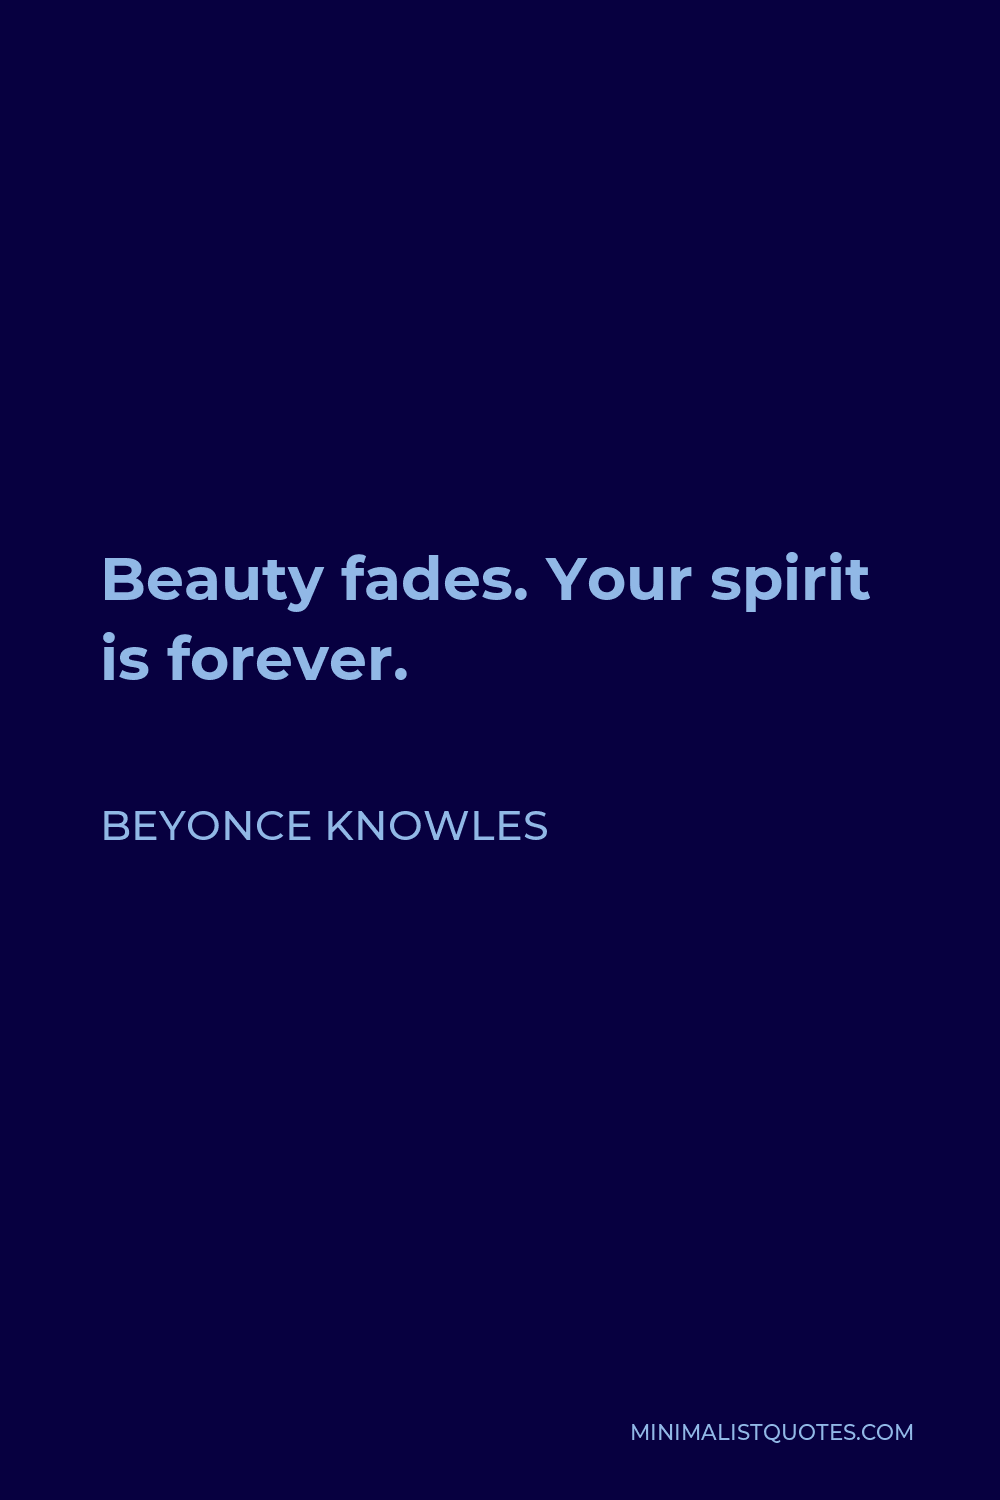 Beyonce Knowles Quote - Beauty fades. Your spirit is forever.